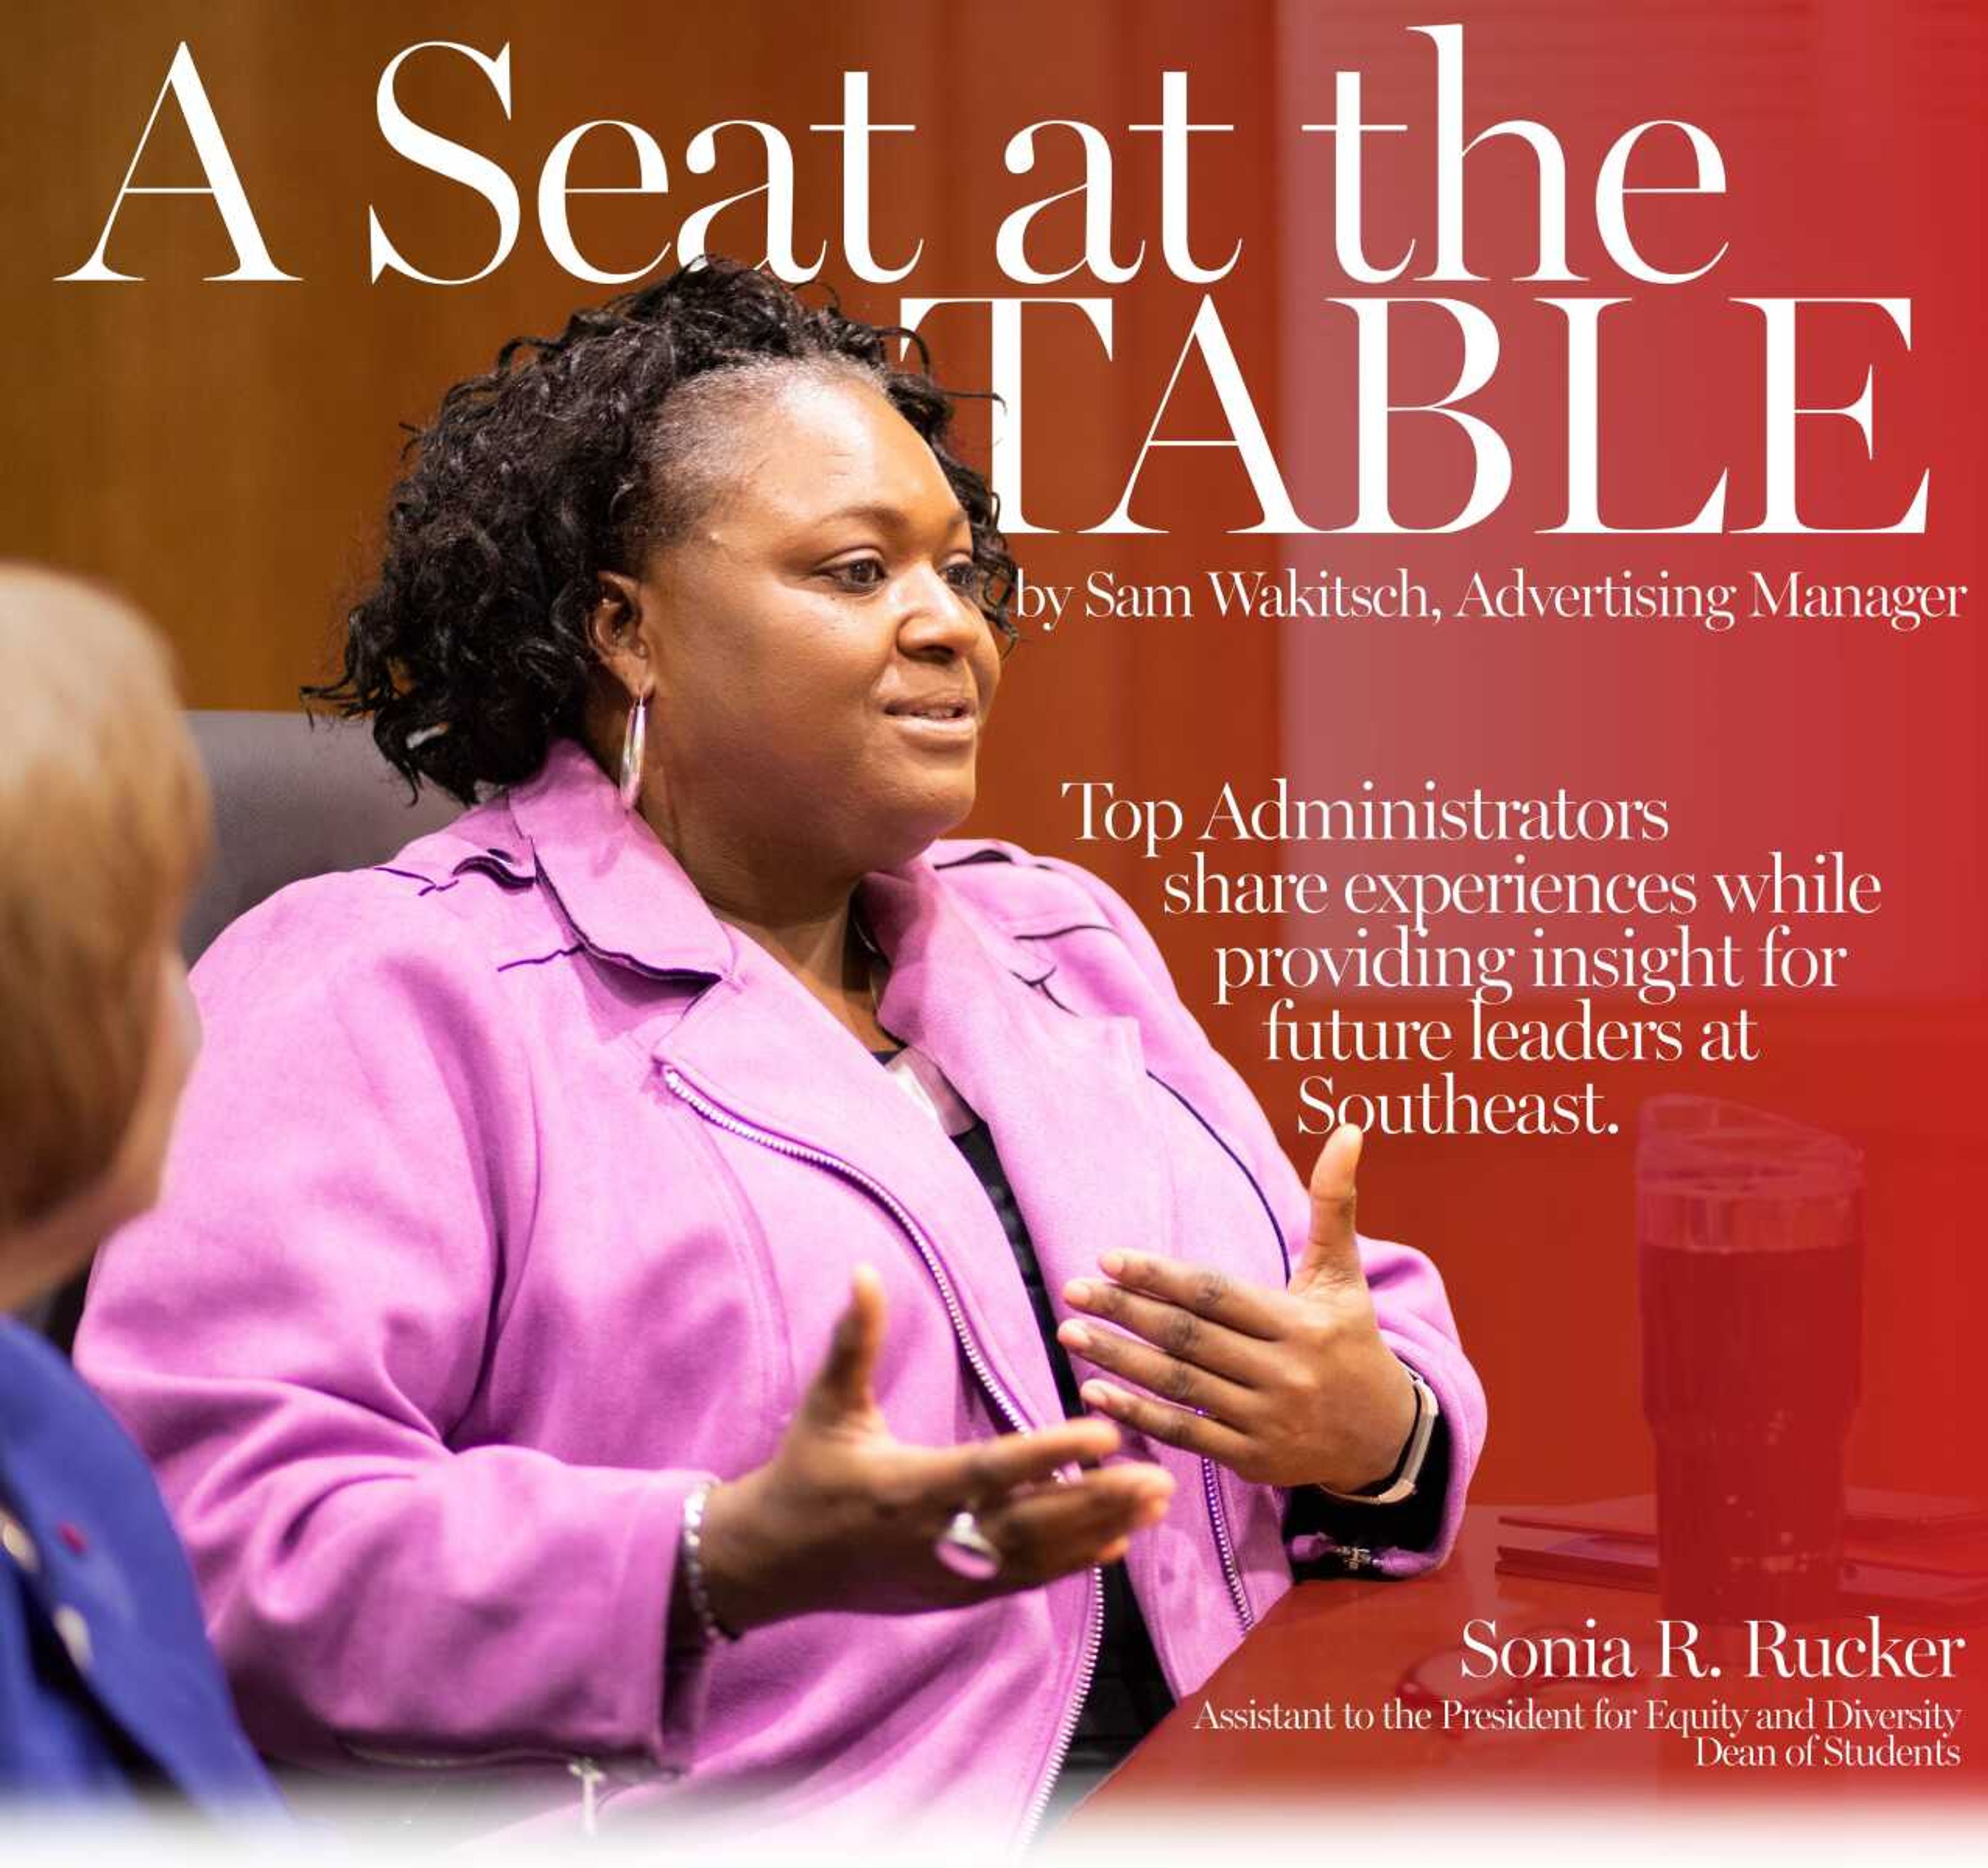 Sonia R. Rucker, Assistant to the President for Equity and Diversity and Dean of Students 